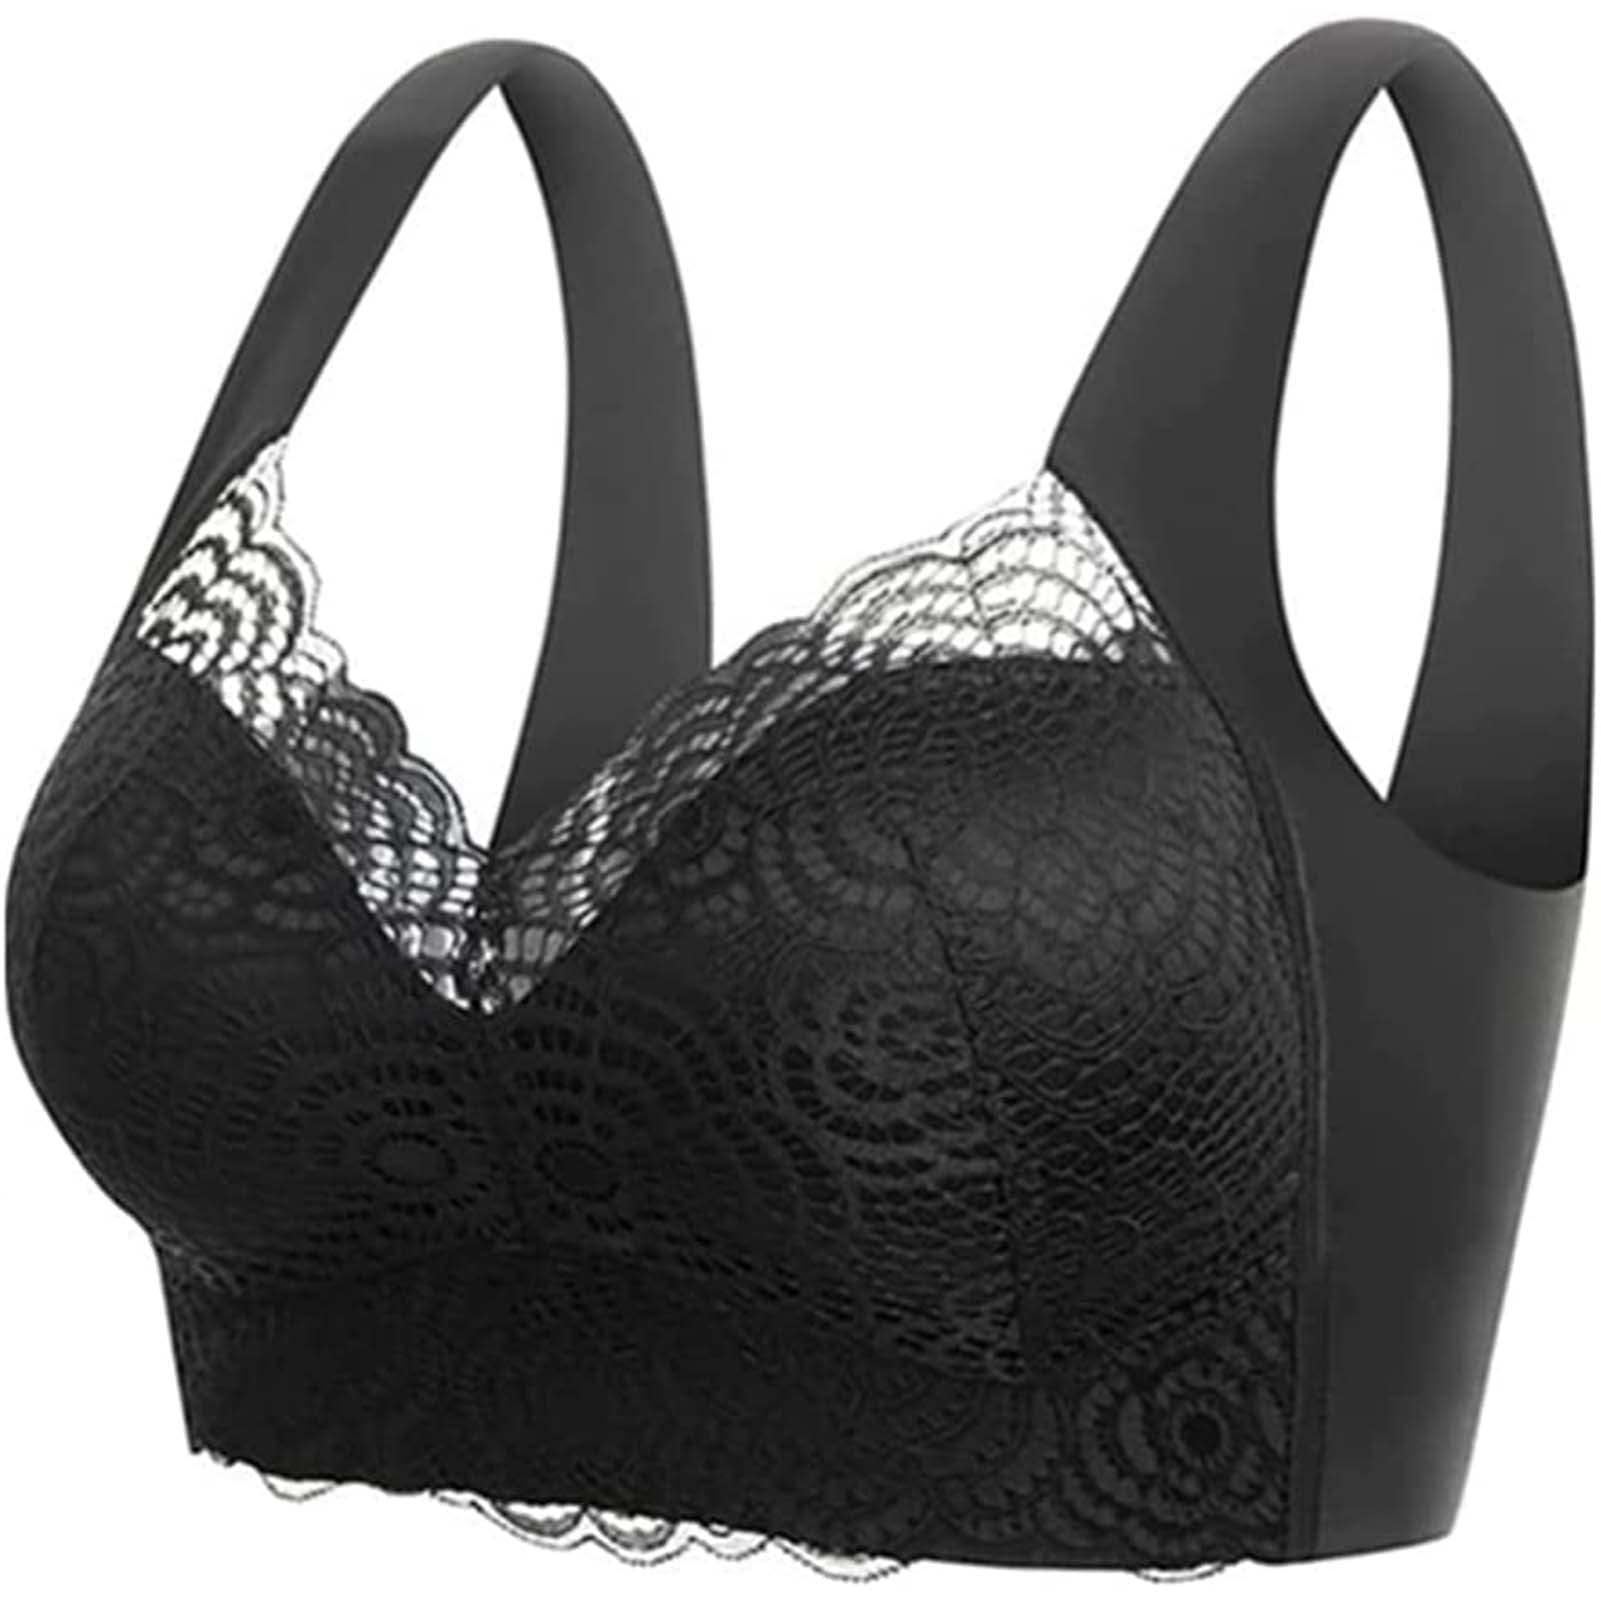 Sksloeg Plus Size Bras for Women 4x-5x Full Coverage Underwire Bras Plus  Size,lifting Deep Cup Bra for Heavy Breast,Black 36E 